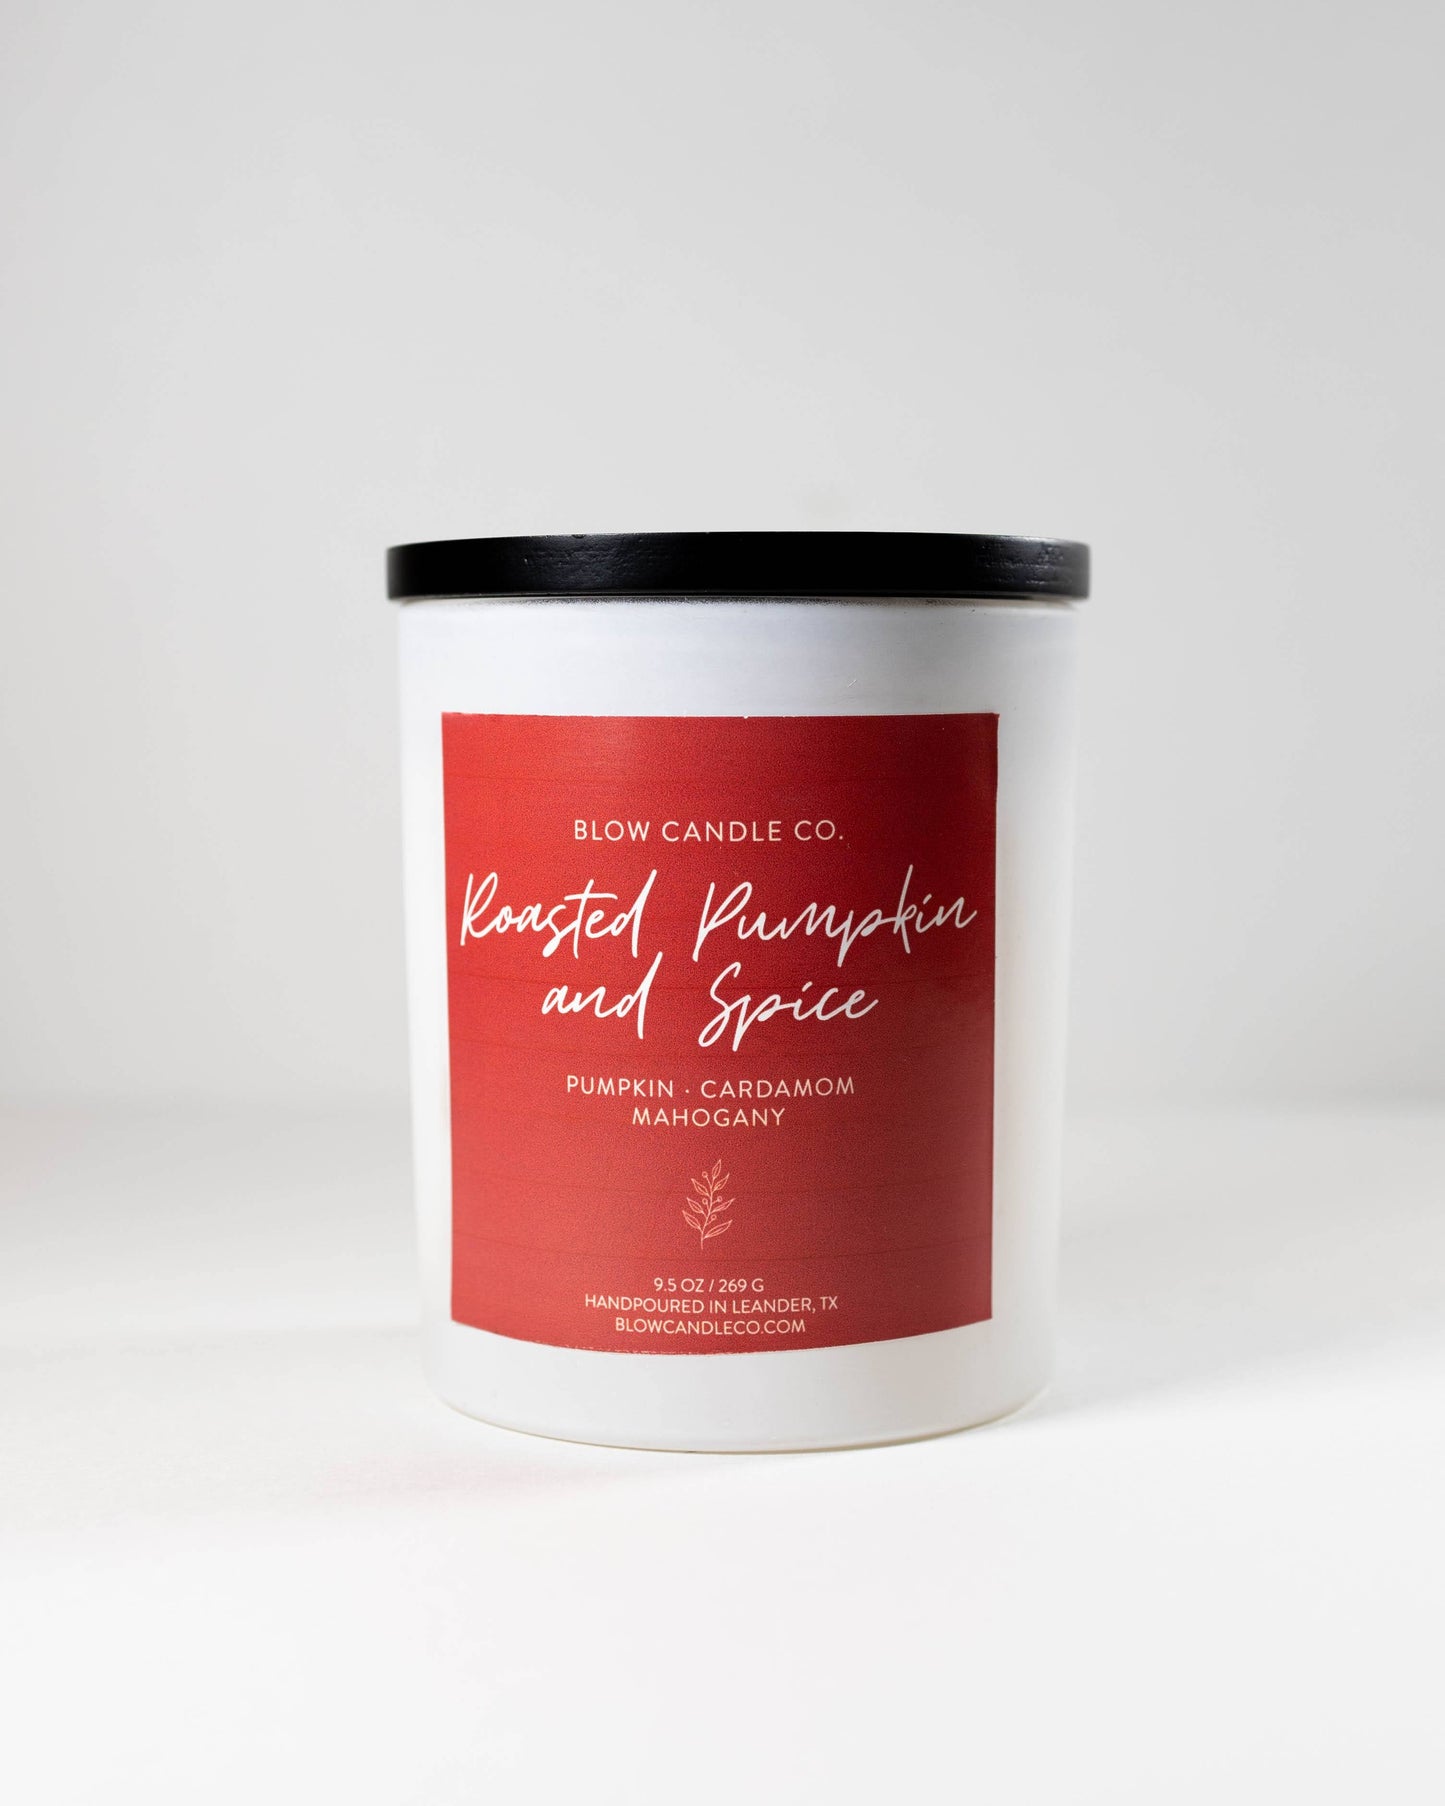 Roasted Pumpkin and Spice Candle